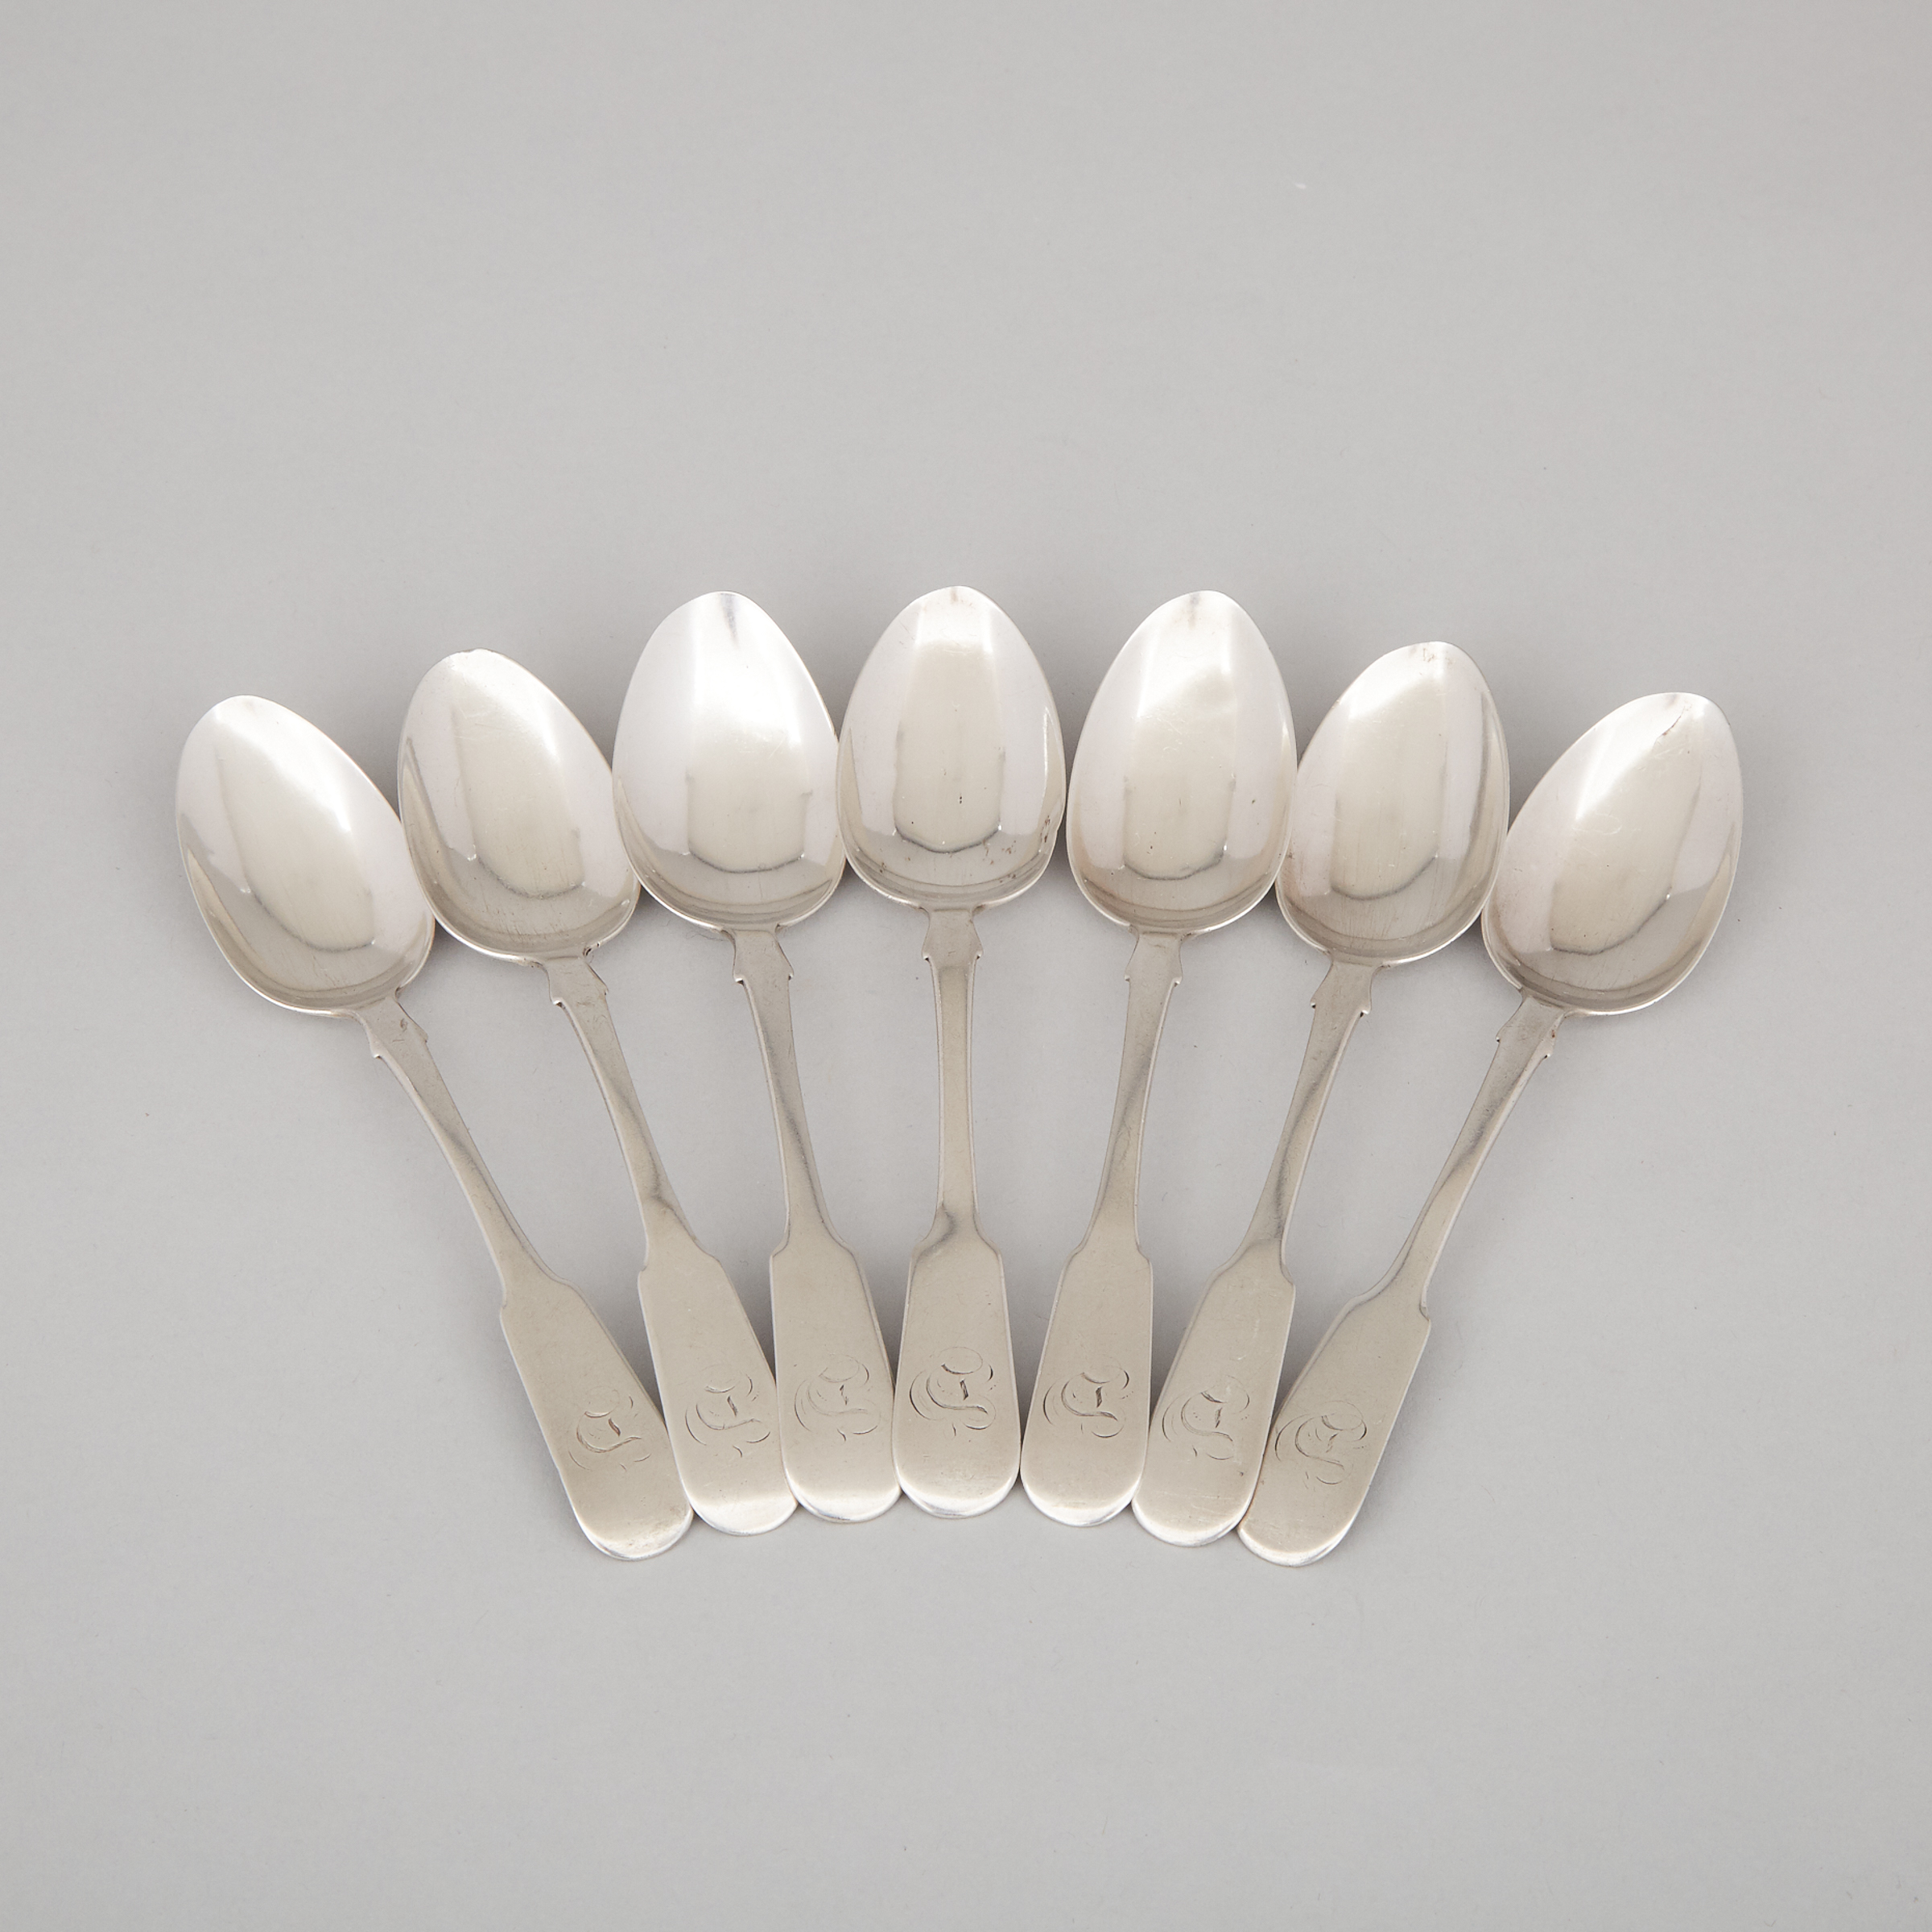 Seven Canadian Silver Fiddle Pattern Tea Spoons, Francis Bohle, Montreal, Que., c.1843-76